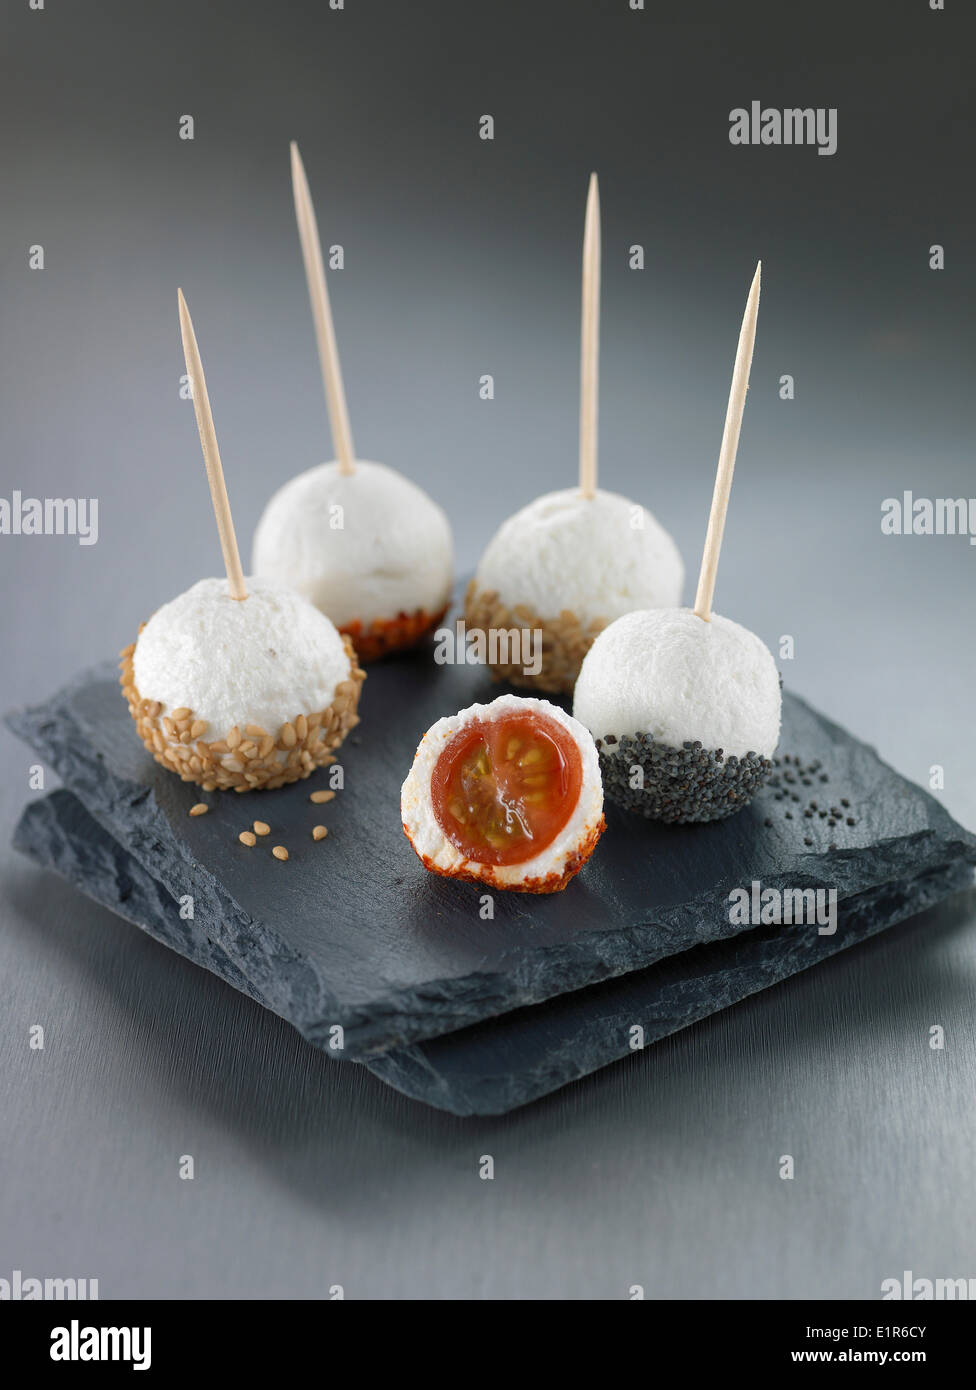 Cherry tomato and cheese balls coated with sesame seeds or poppy seeds Stock Photo